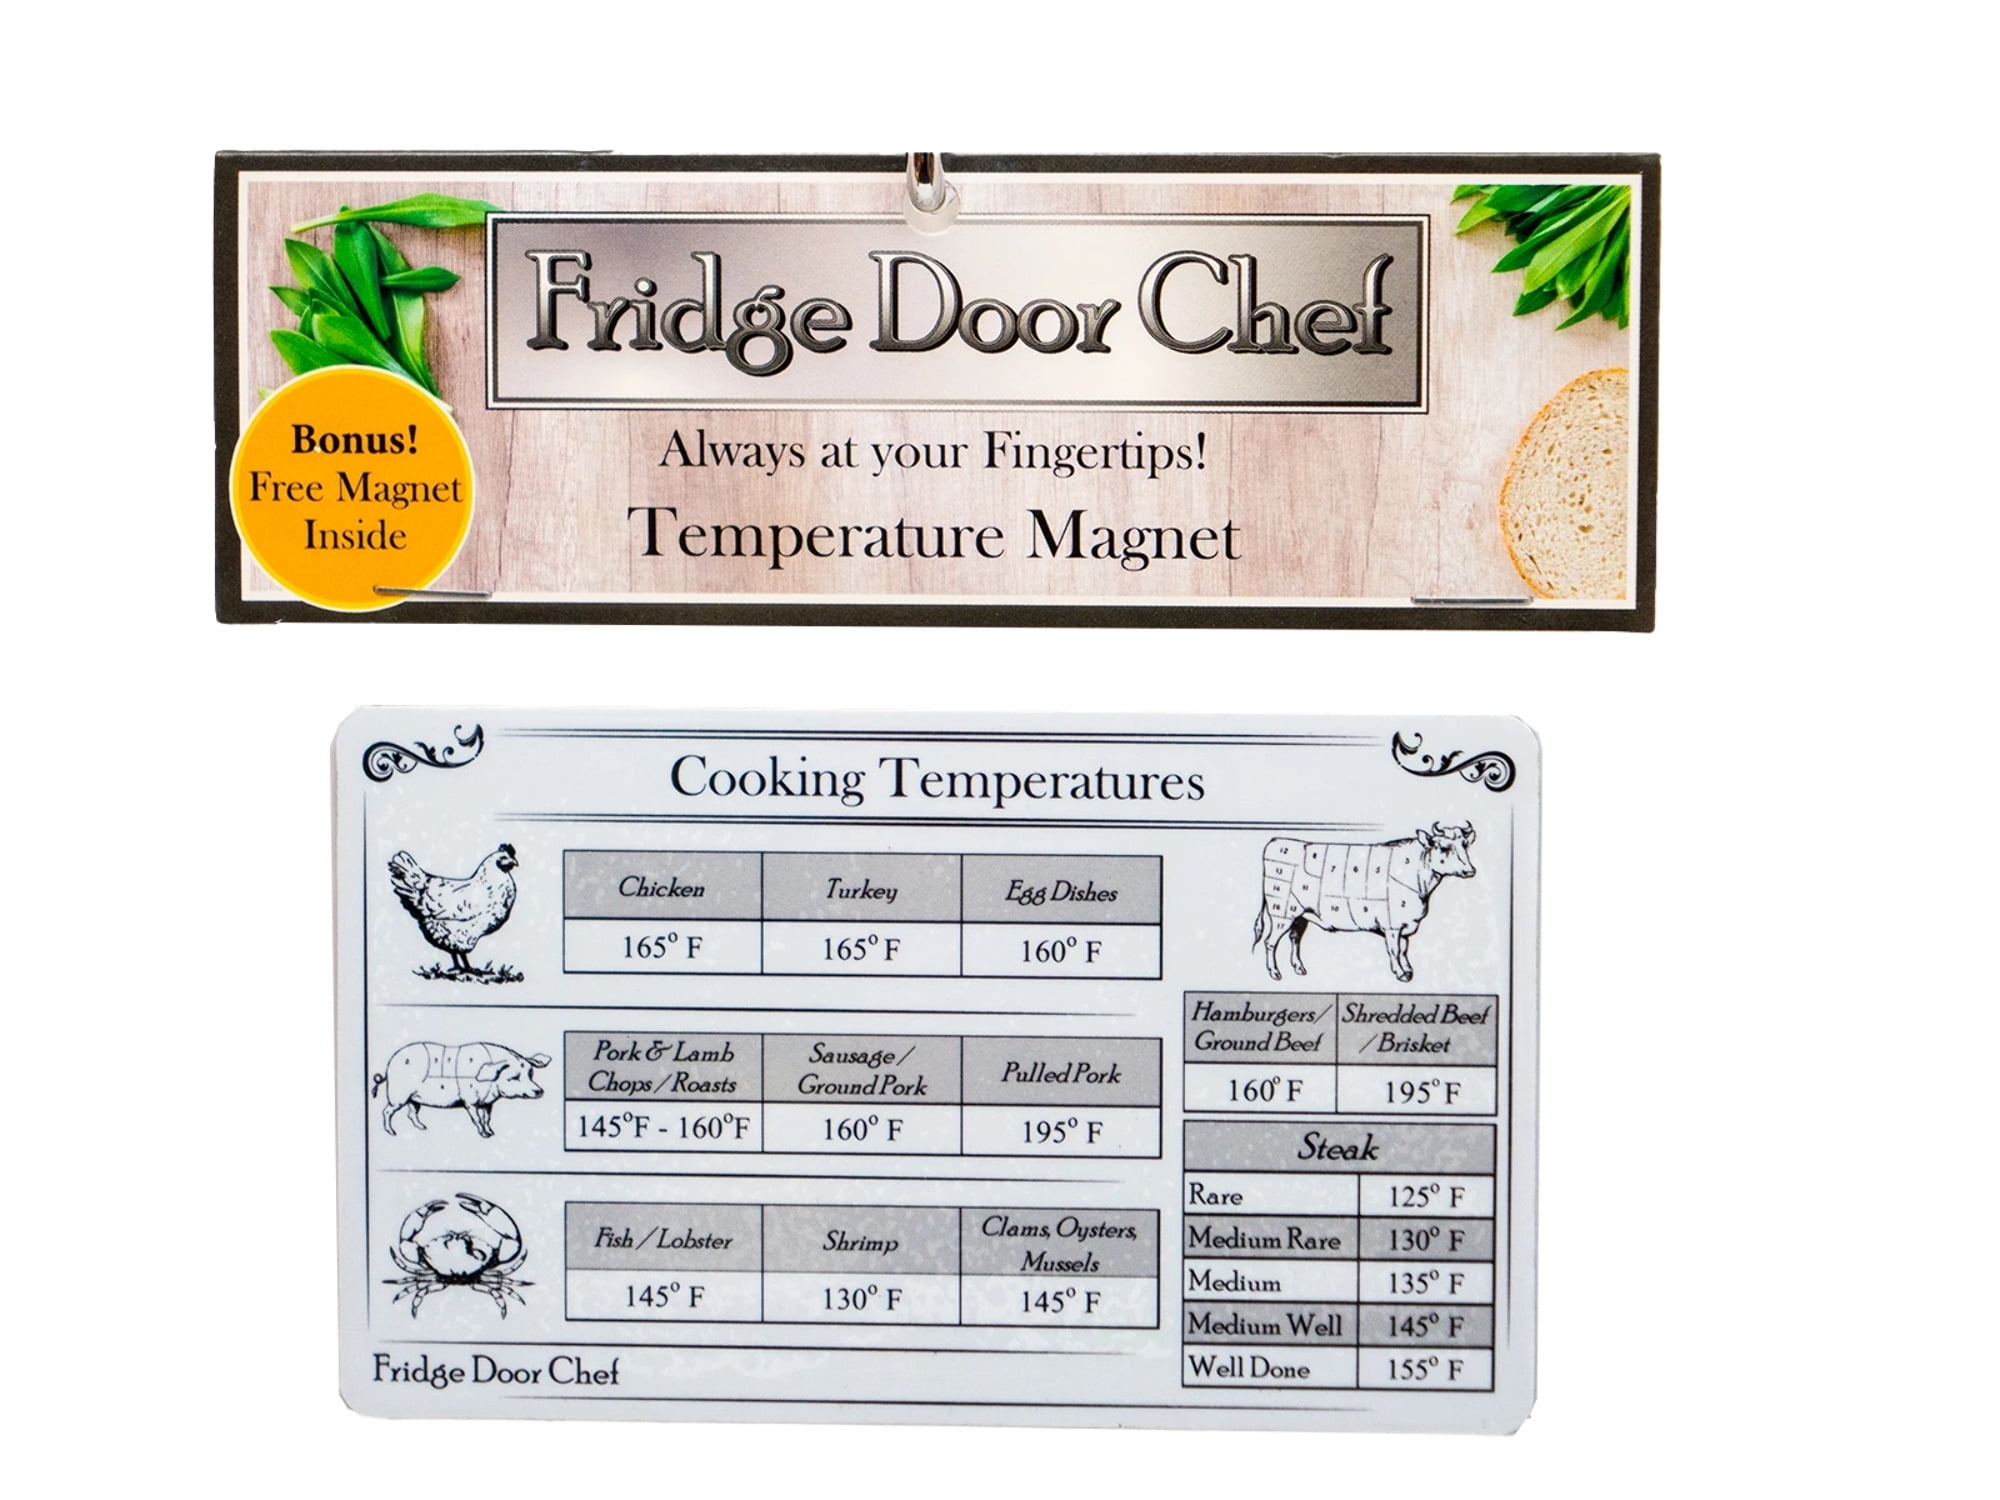 Internal Cooking Temperature Magnet - from The Fridge Door Chef! Cook Your Food to The Perfect Temp Every Time., Size: 3 x 5, Beige